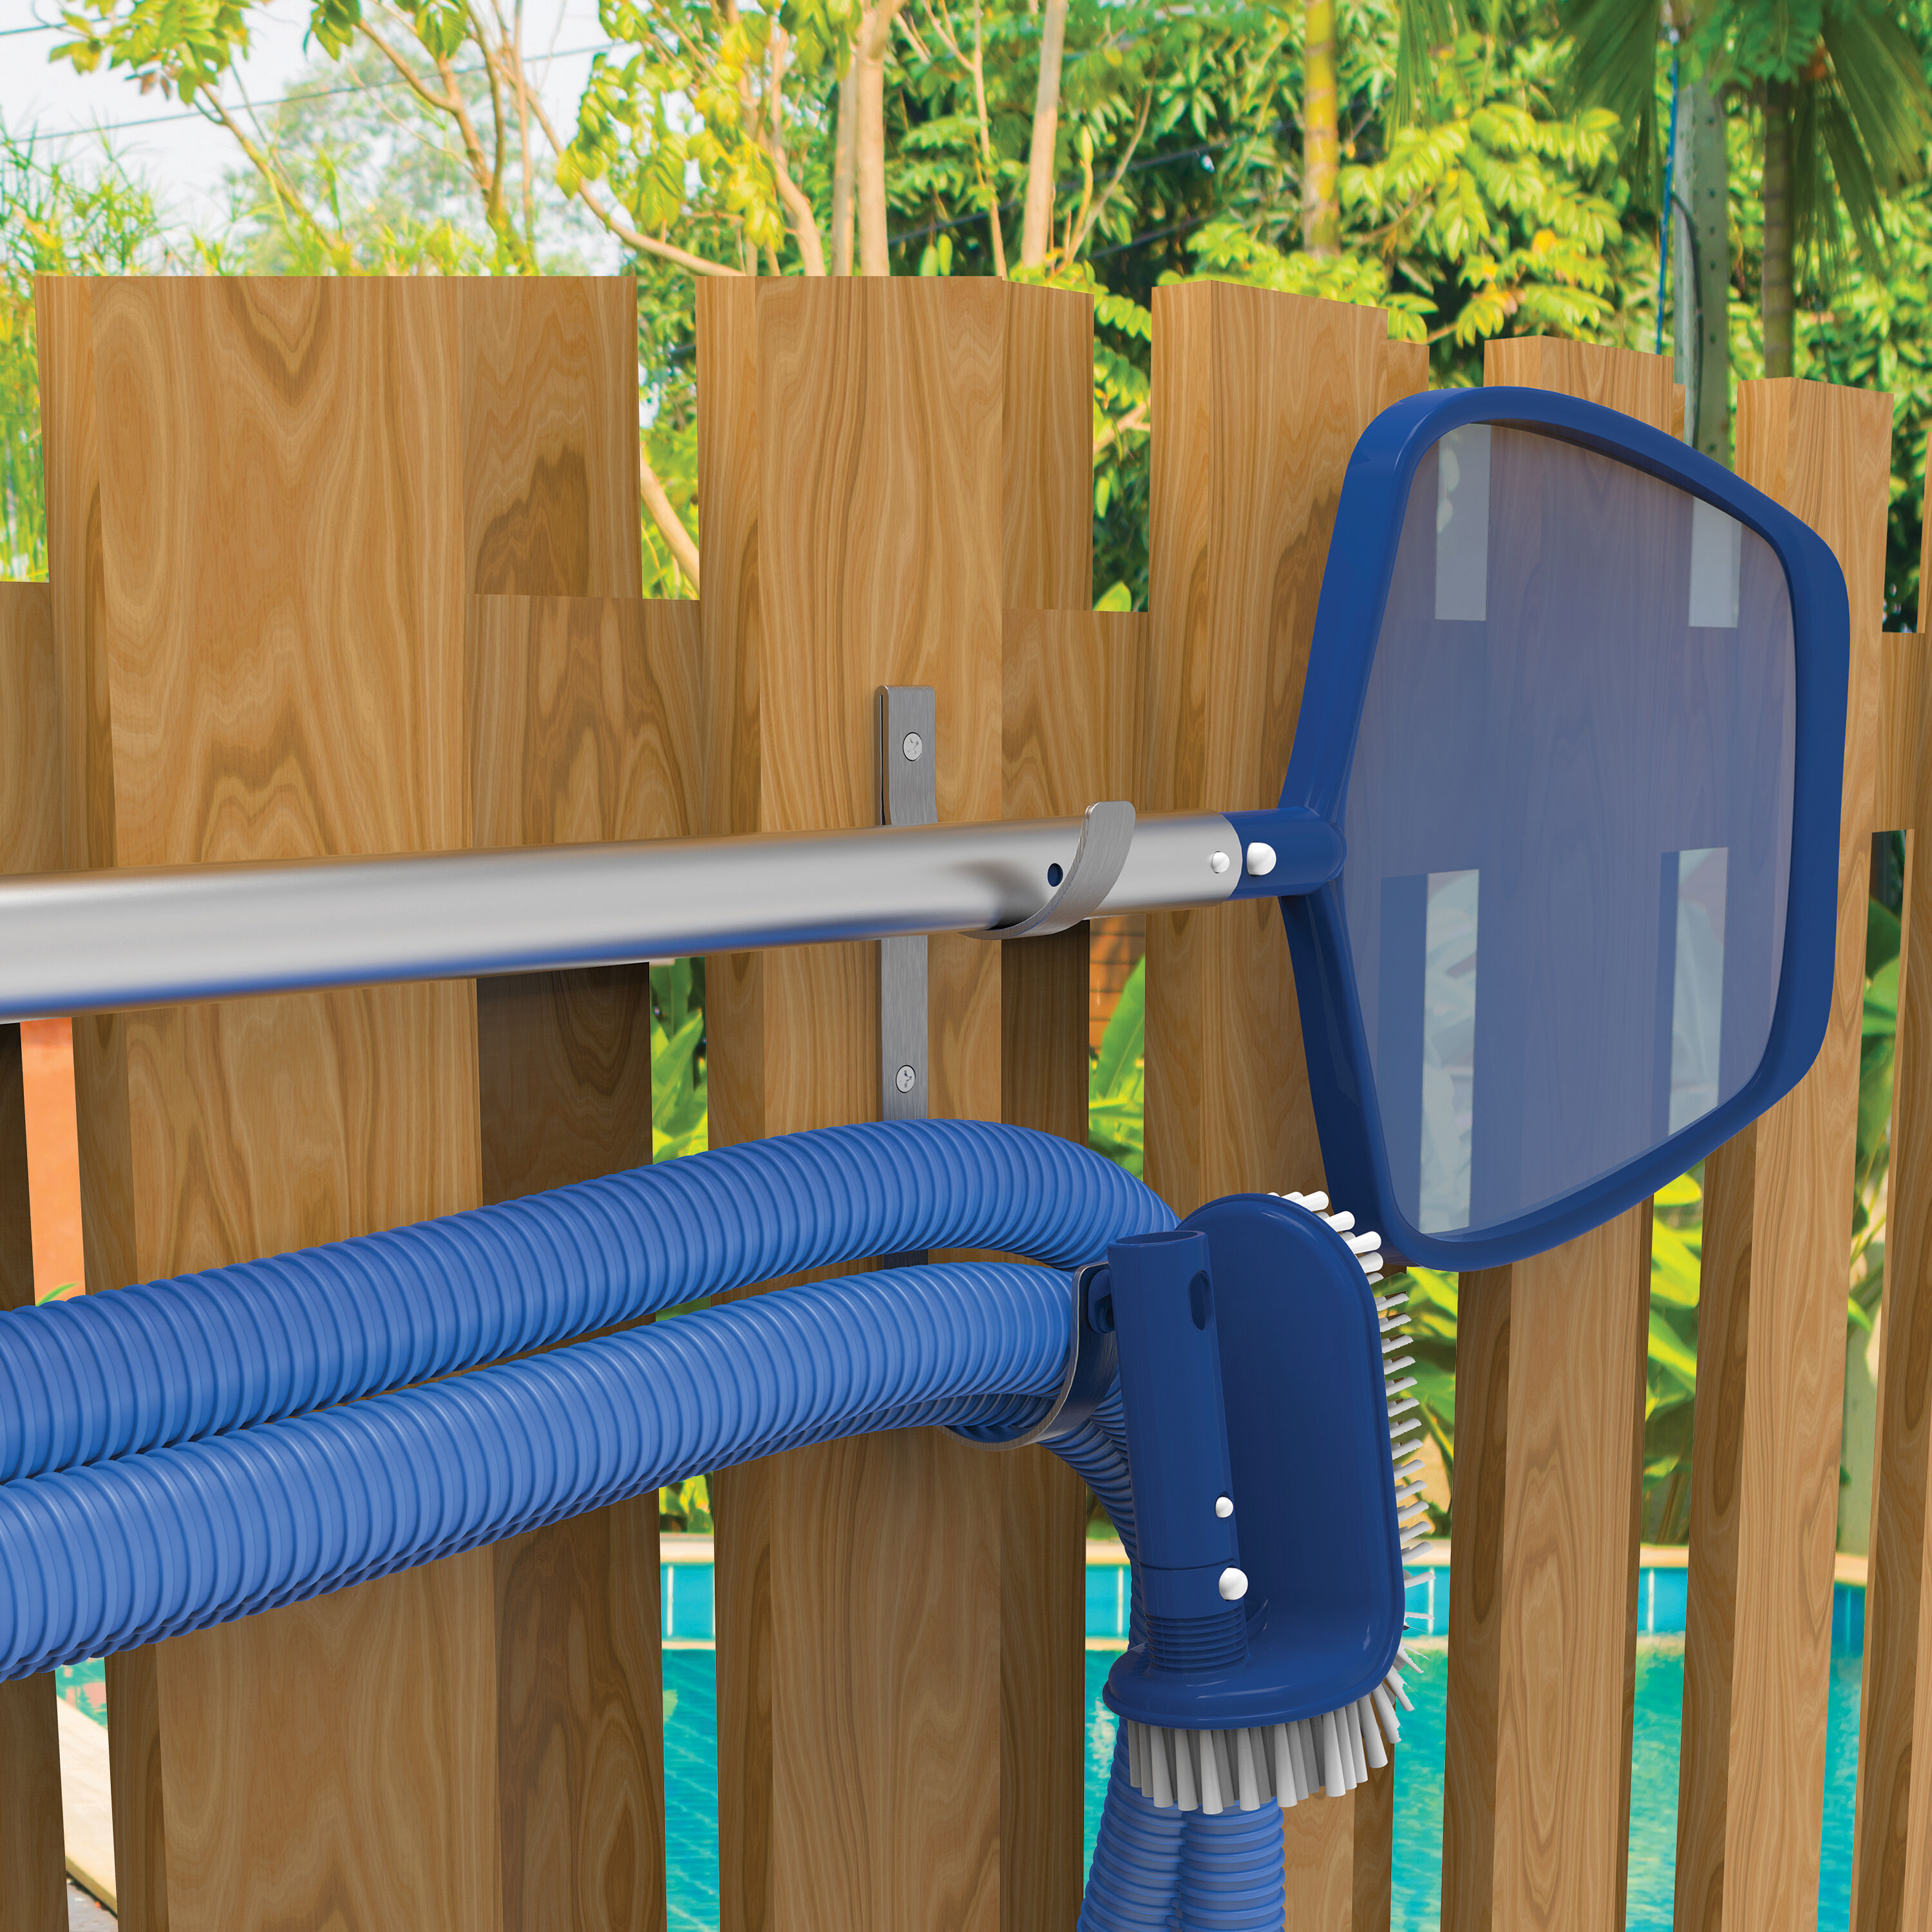 Pole and hose hanger(s) Pool Maintenance Equipment at